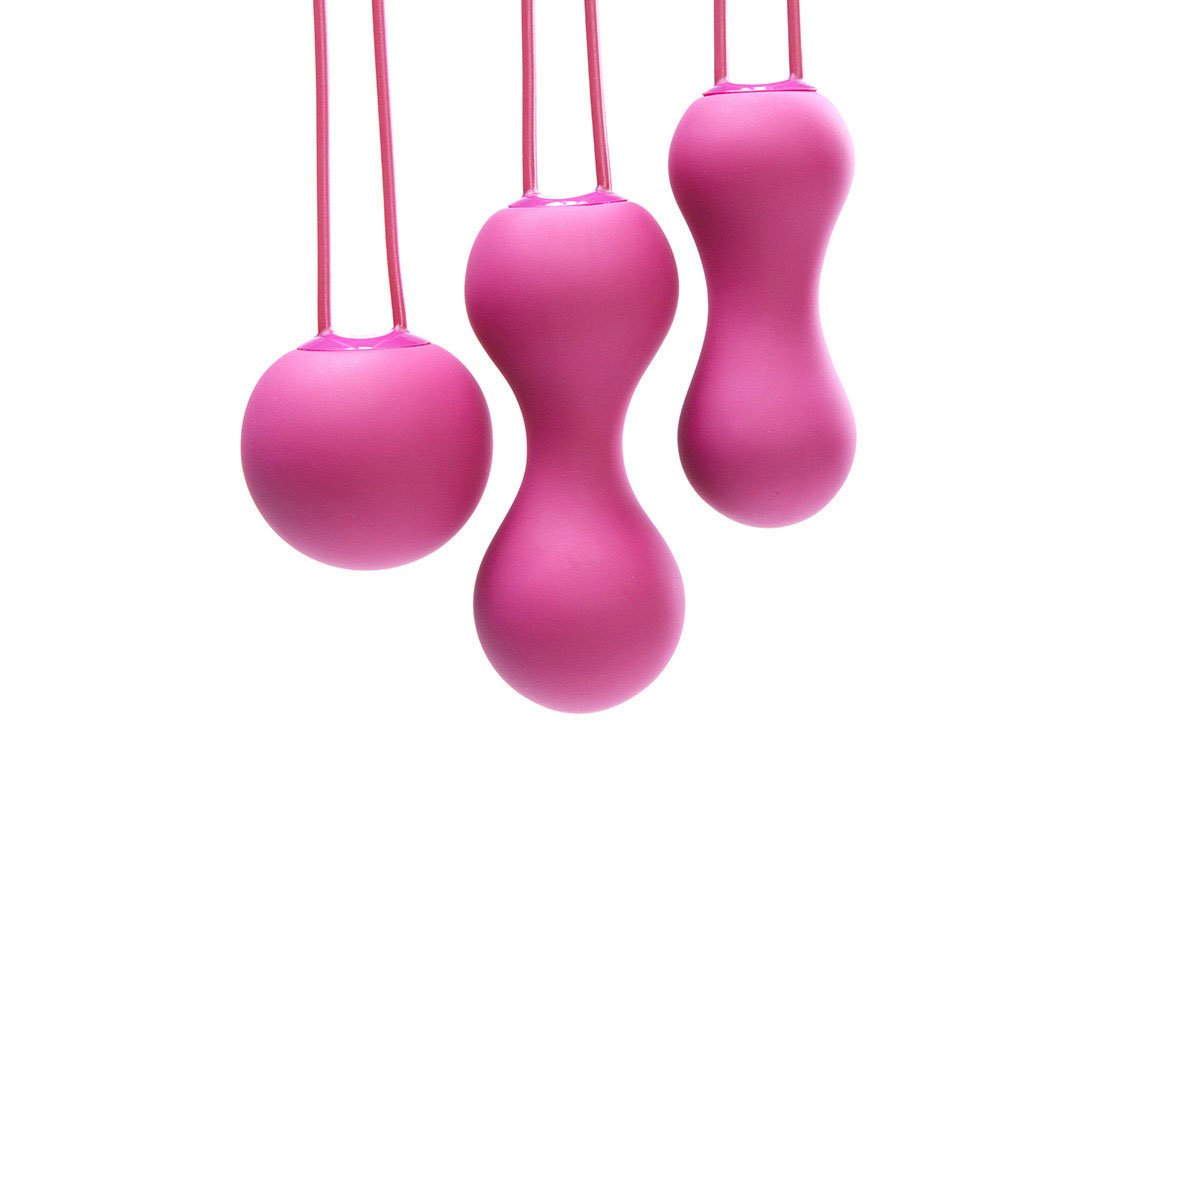 Je Joue Ami Balls - Buy At Luxury Toy X - Free 3-Day Shipping